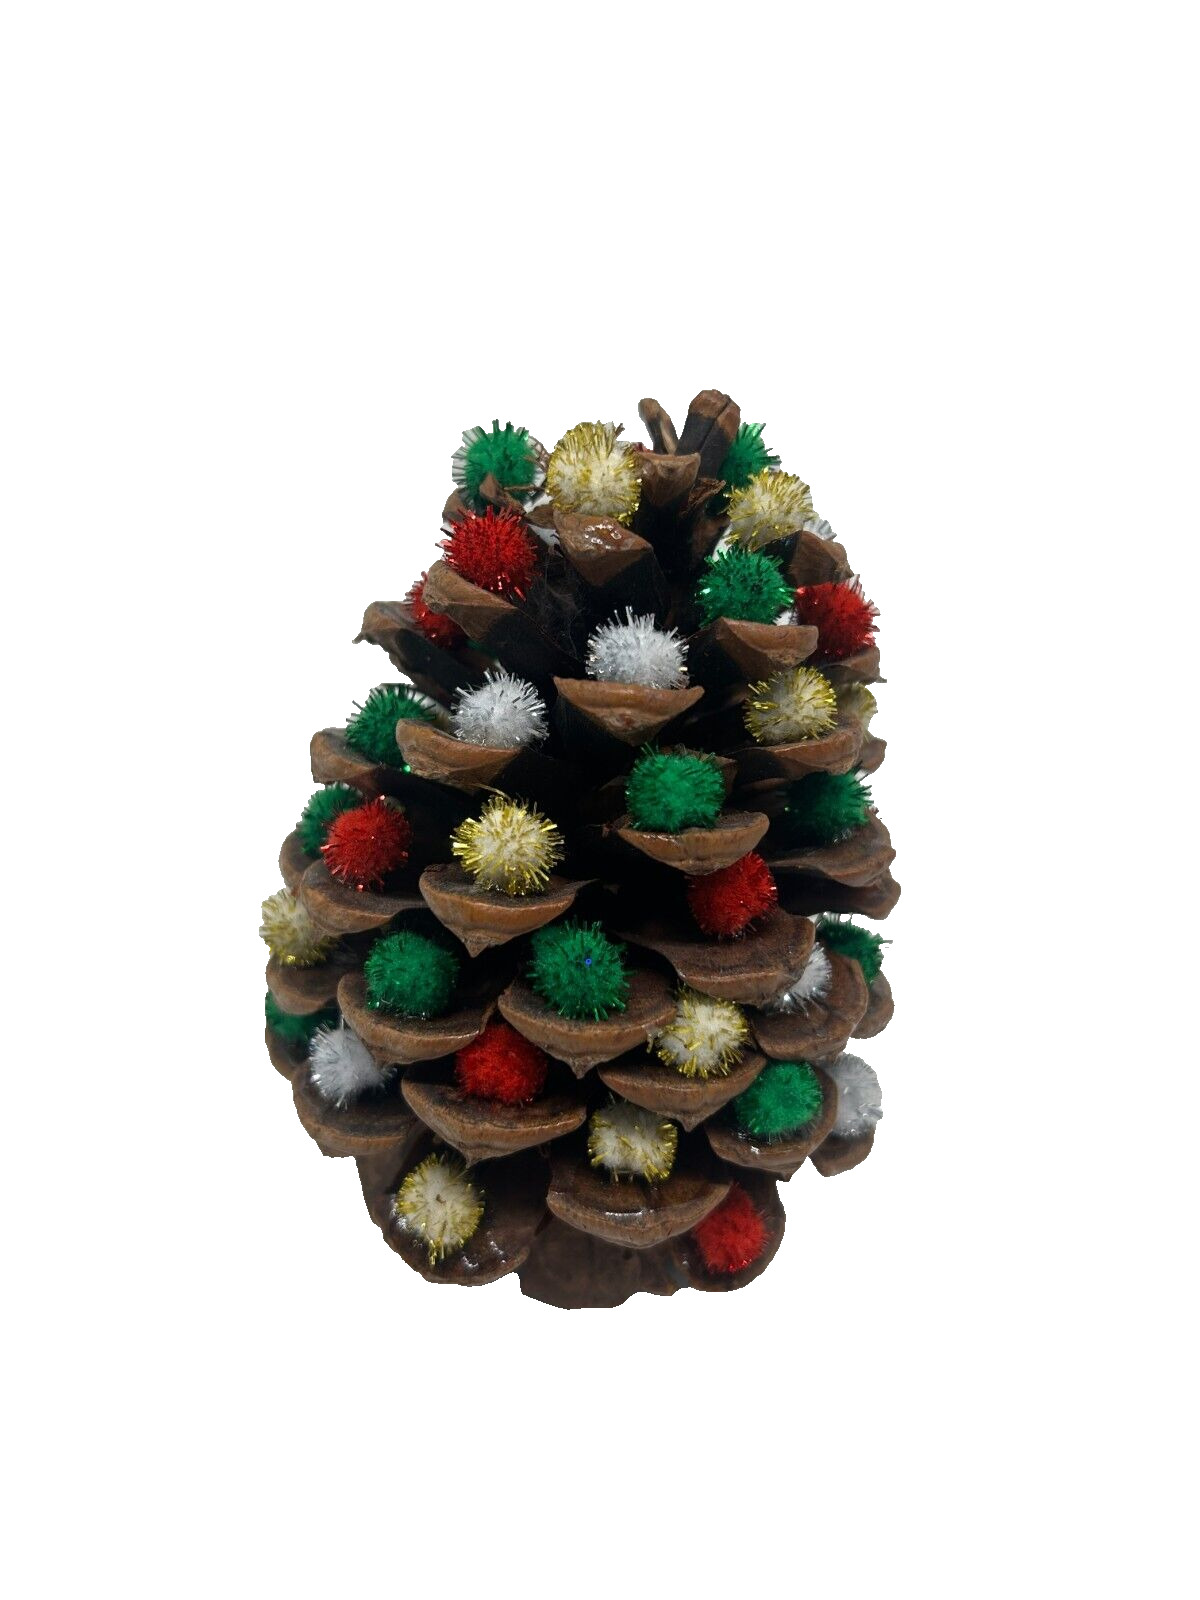 Vintage Small Hand Crafted Pinecone Christmas Tree with Tiny Decorations